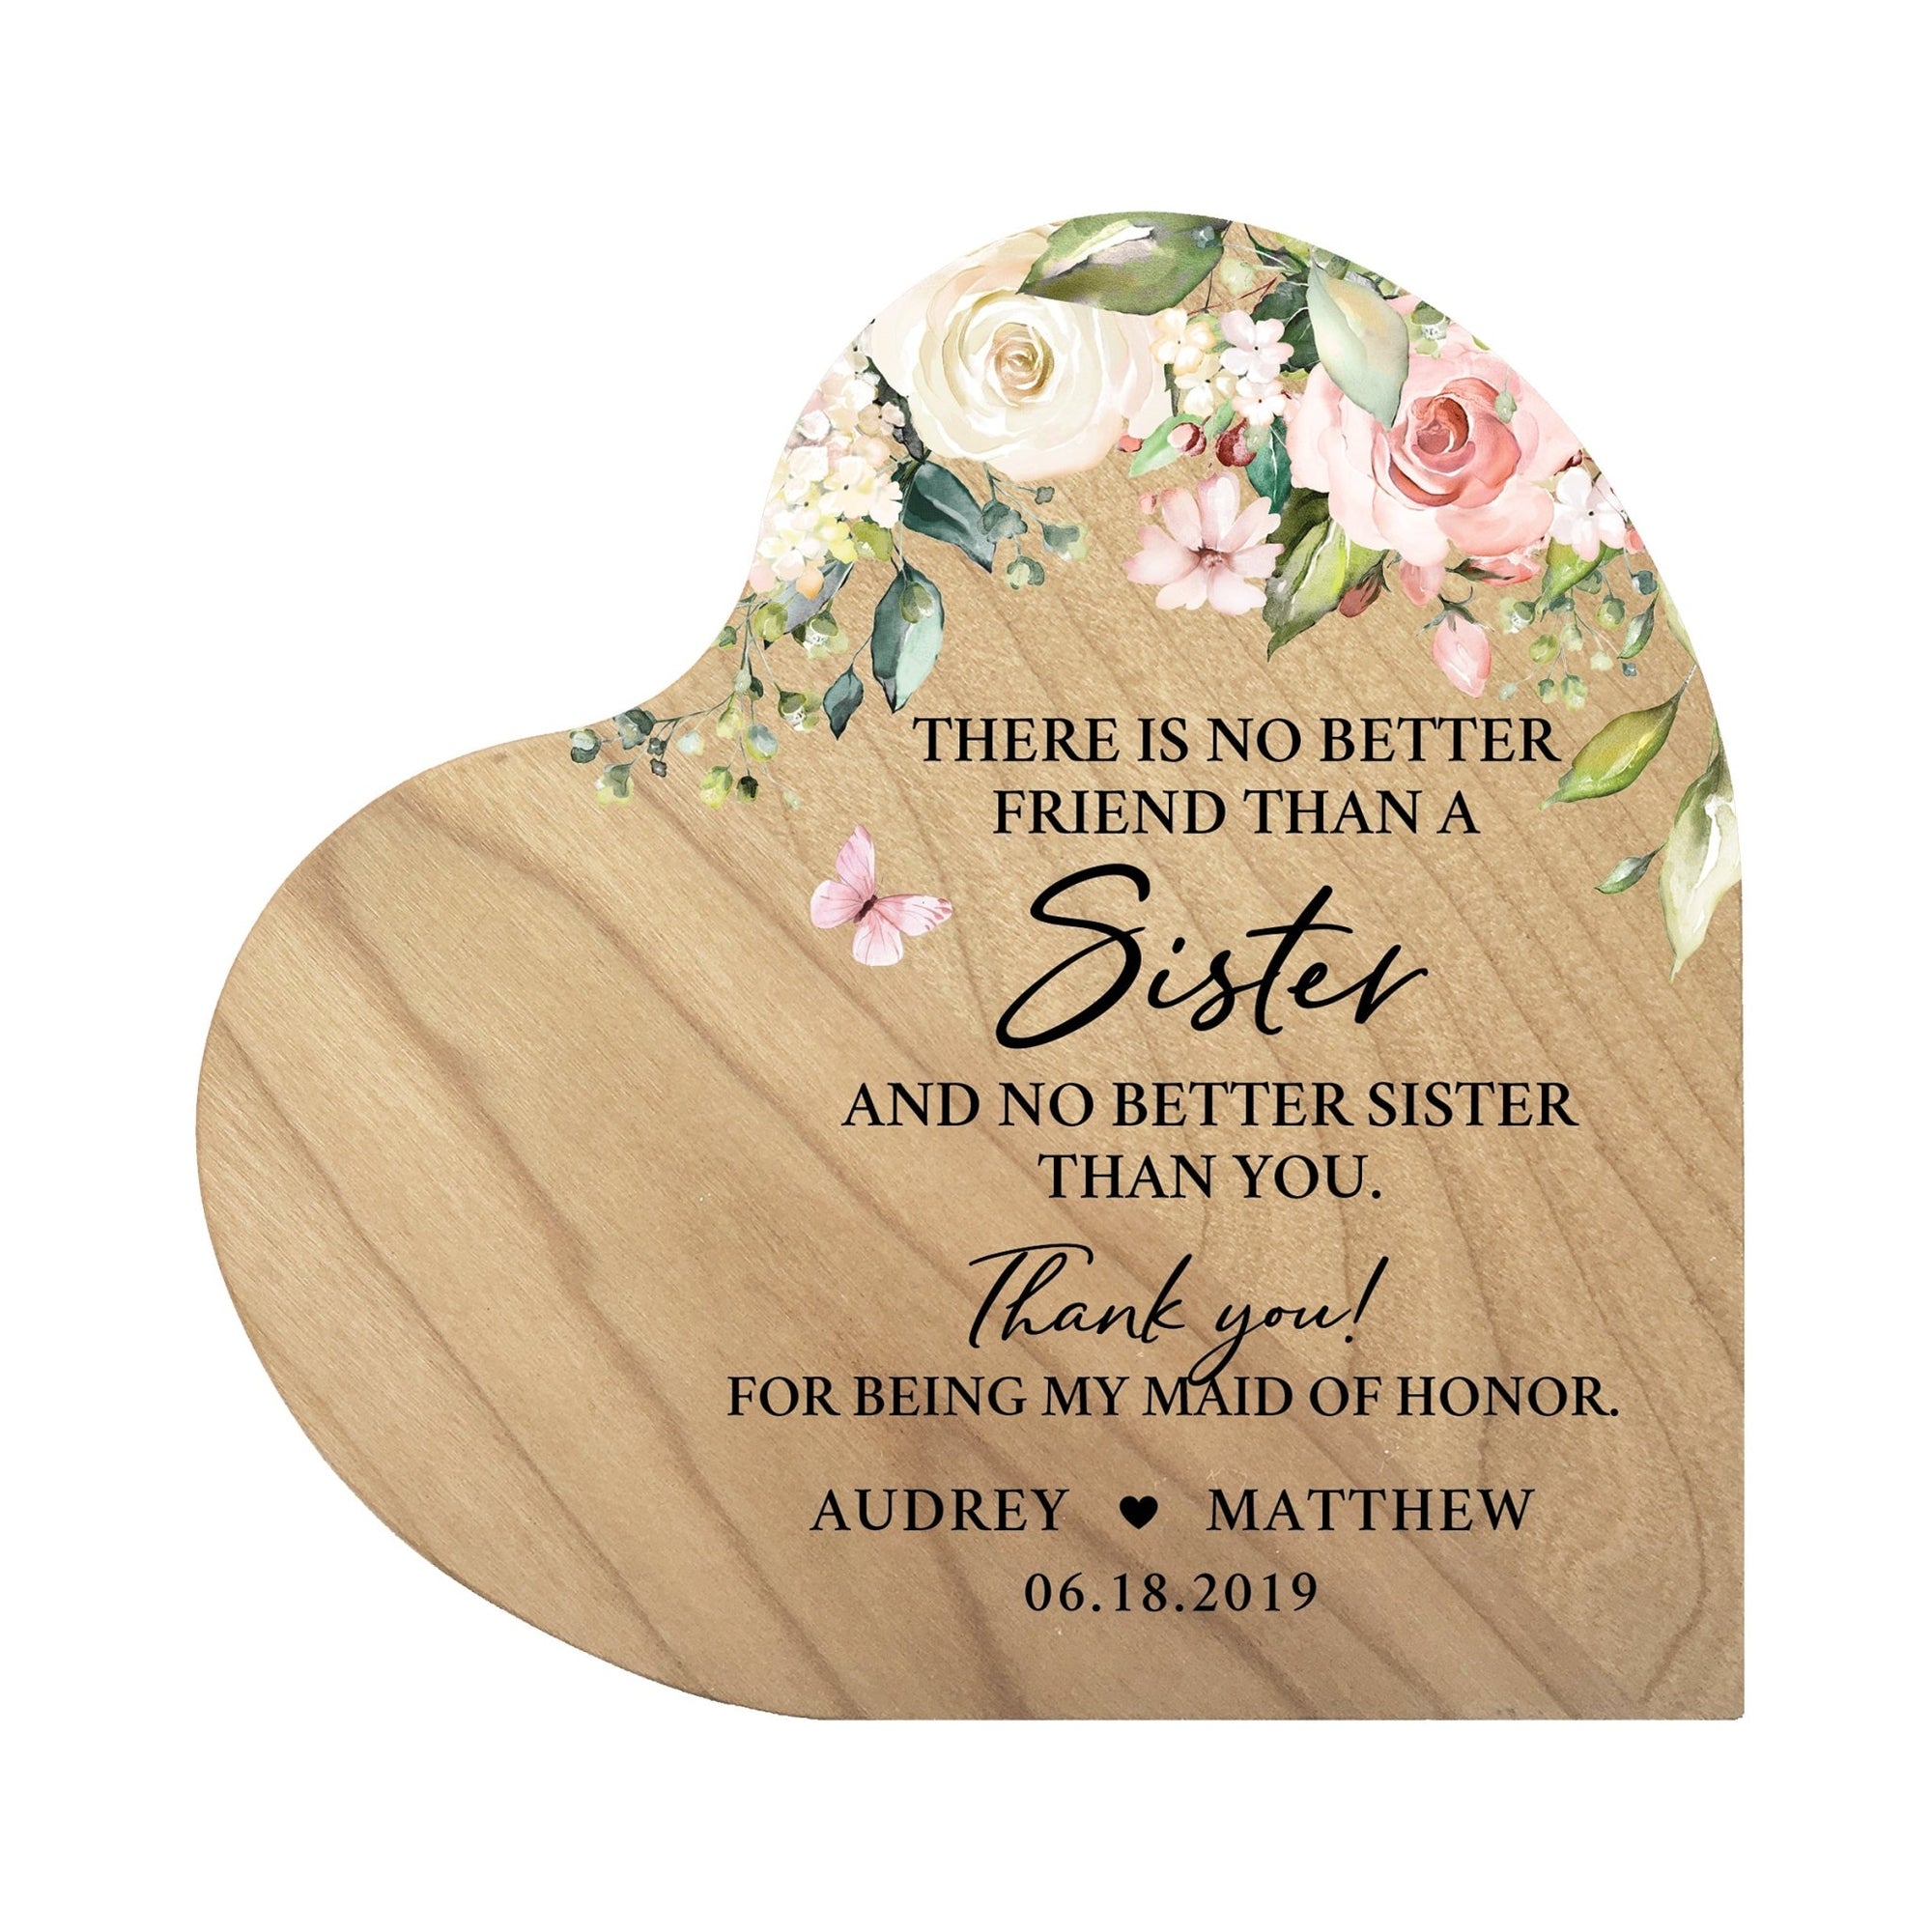 Personalized Inspiring Sister's Love Wooden Heart Block 5in Great - No Better Friend - LifeSong Milestones